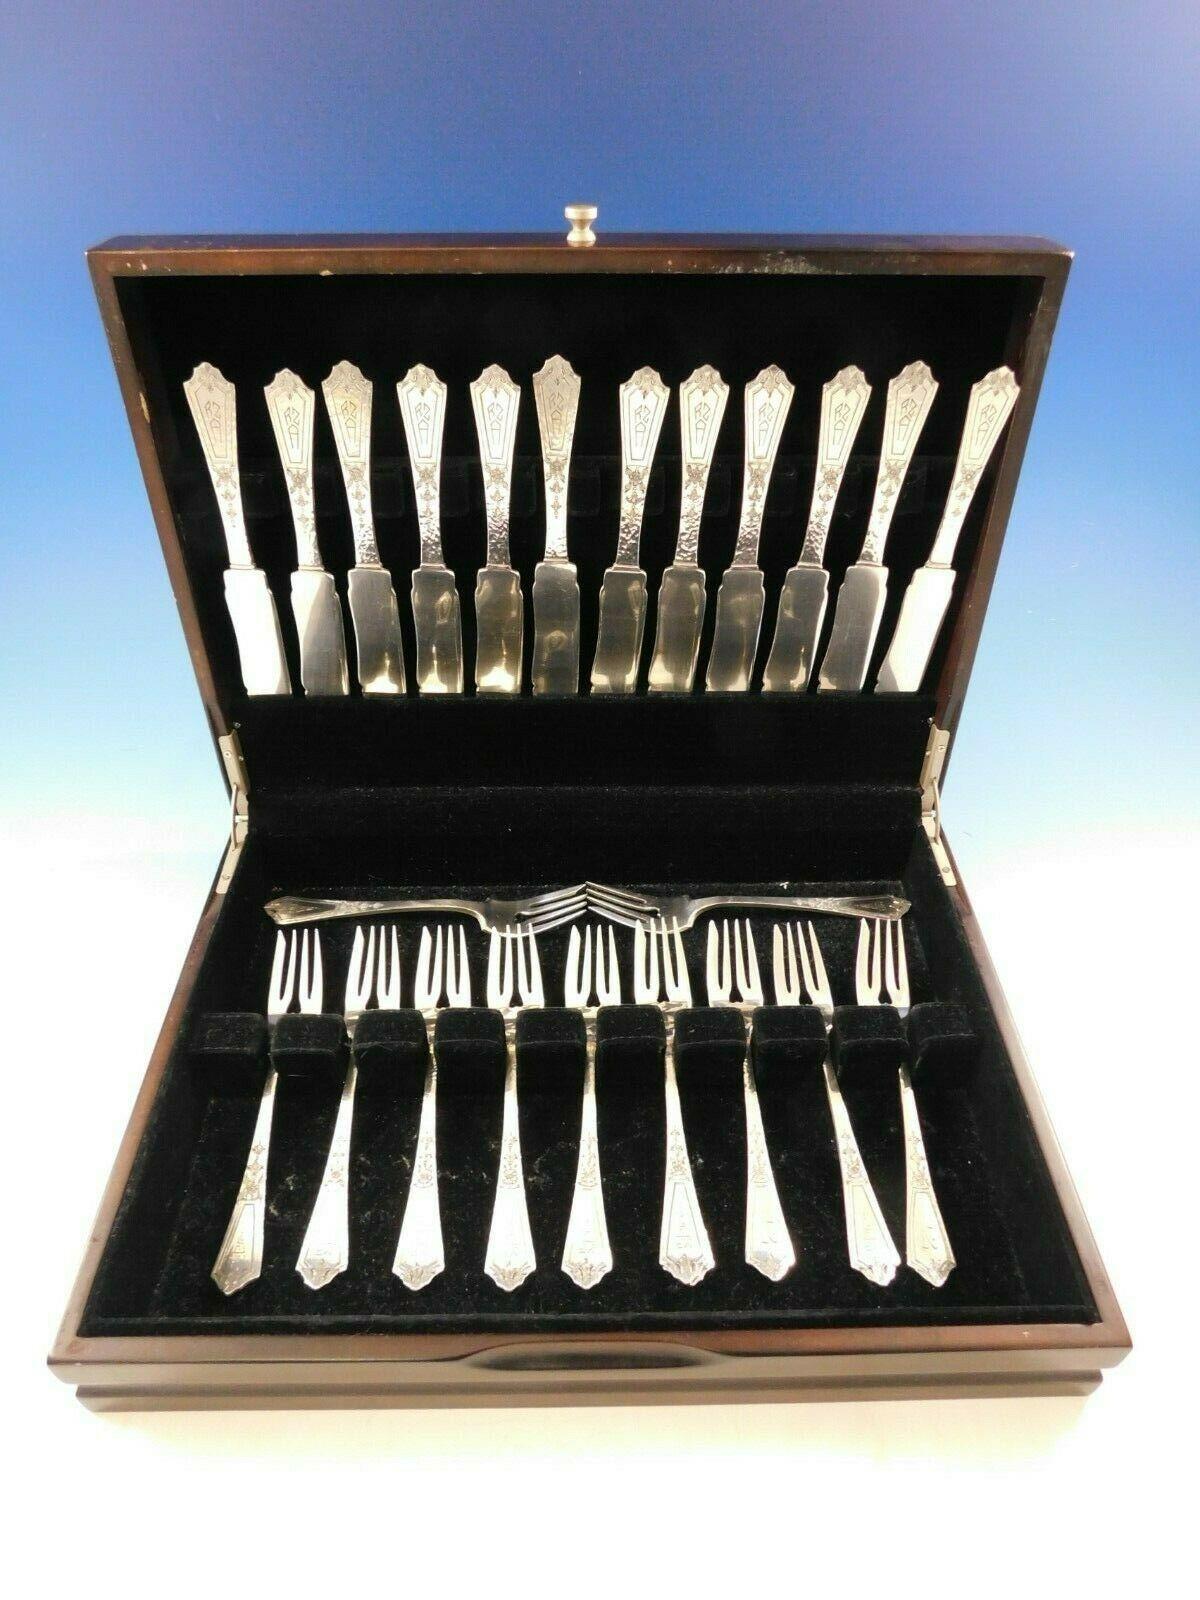 Pattern A by Gorham

Incredible sterling silver fish set in the pattern Pattern A by Gorham. This 24 piece set features a subtle hammered finish and includes 12 fish knives and 12 fish forks. Each piece has a lovely small flower beneath the